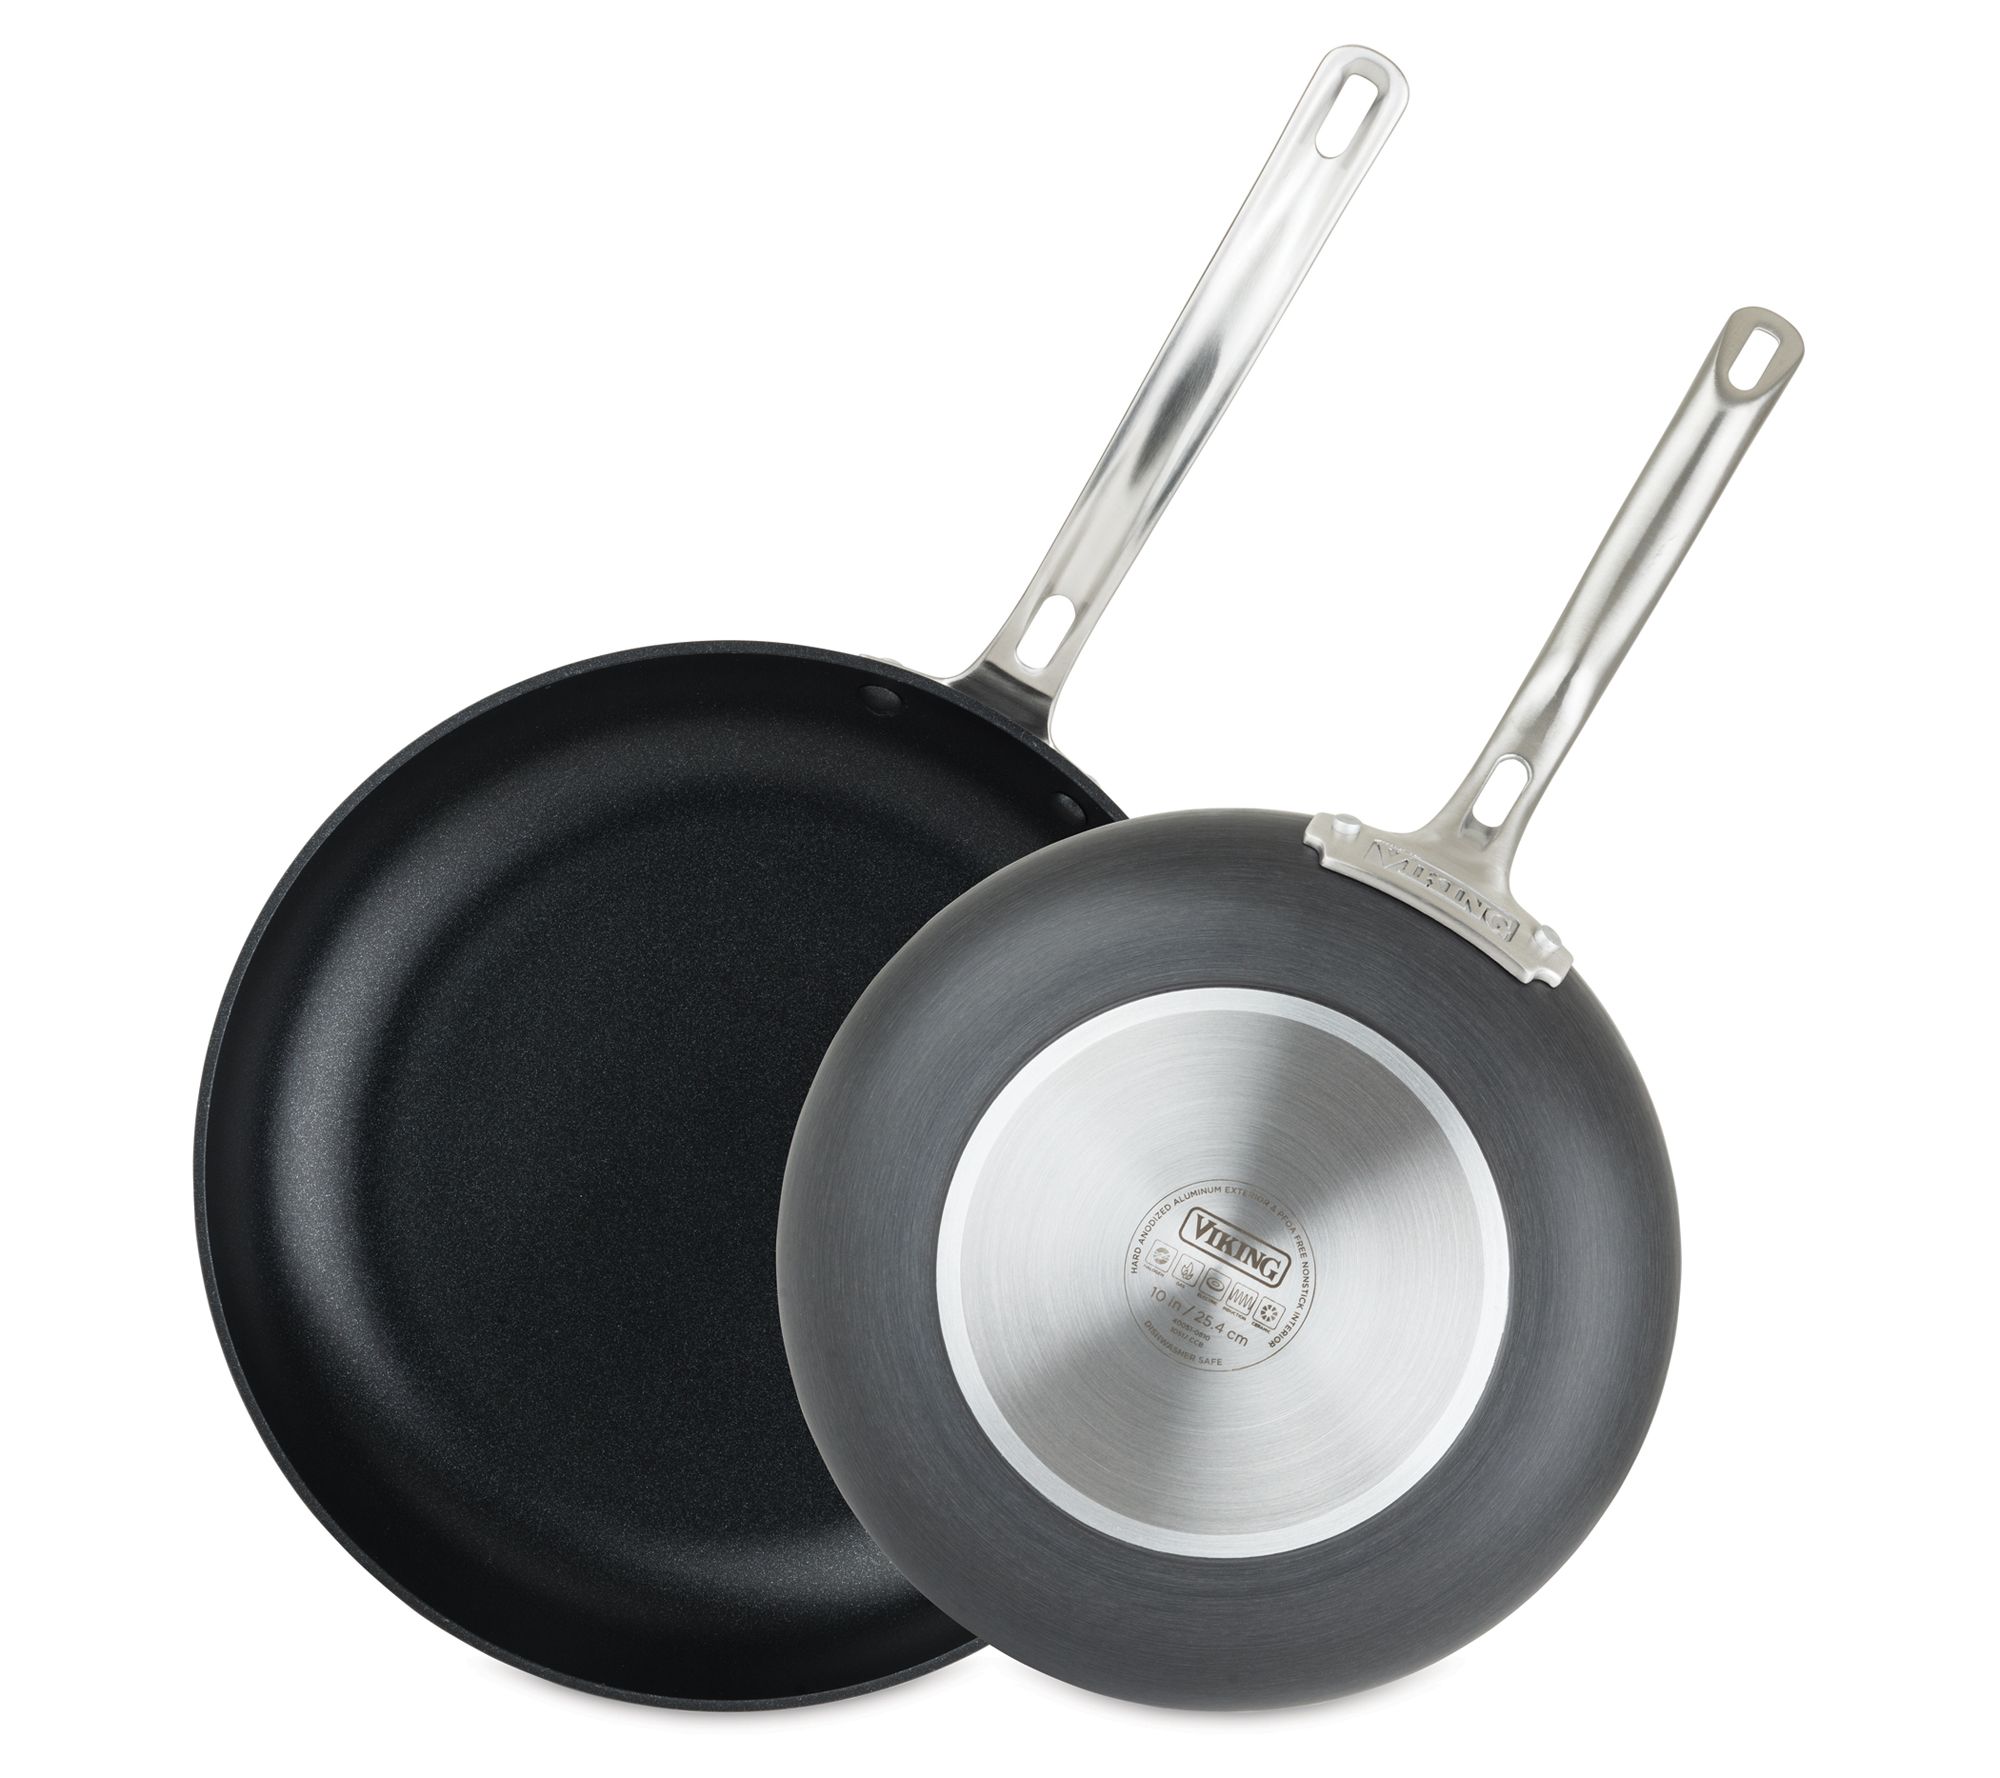 Viking Hard Anodized Nonstick Fry Pan - 10 in.